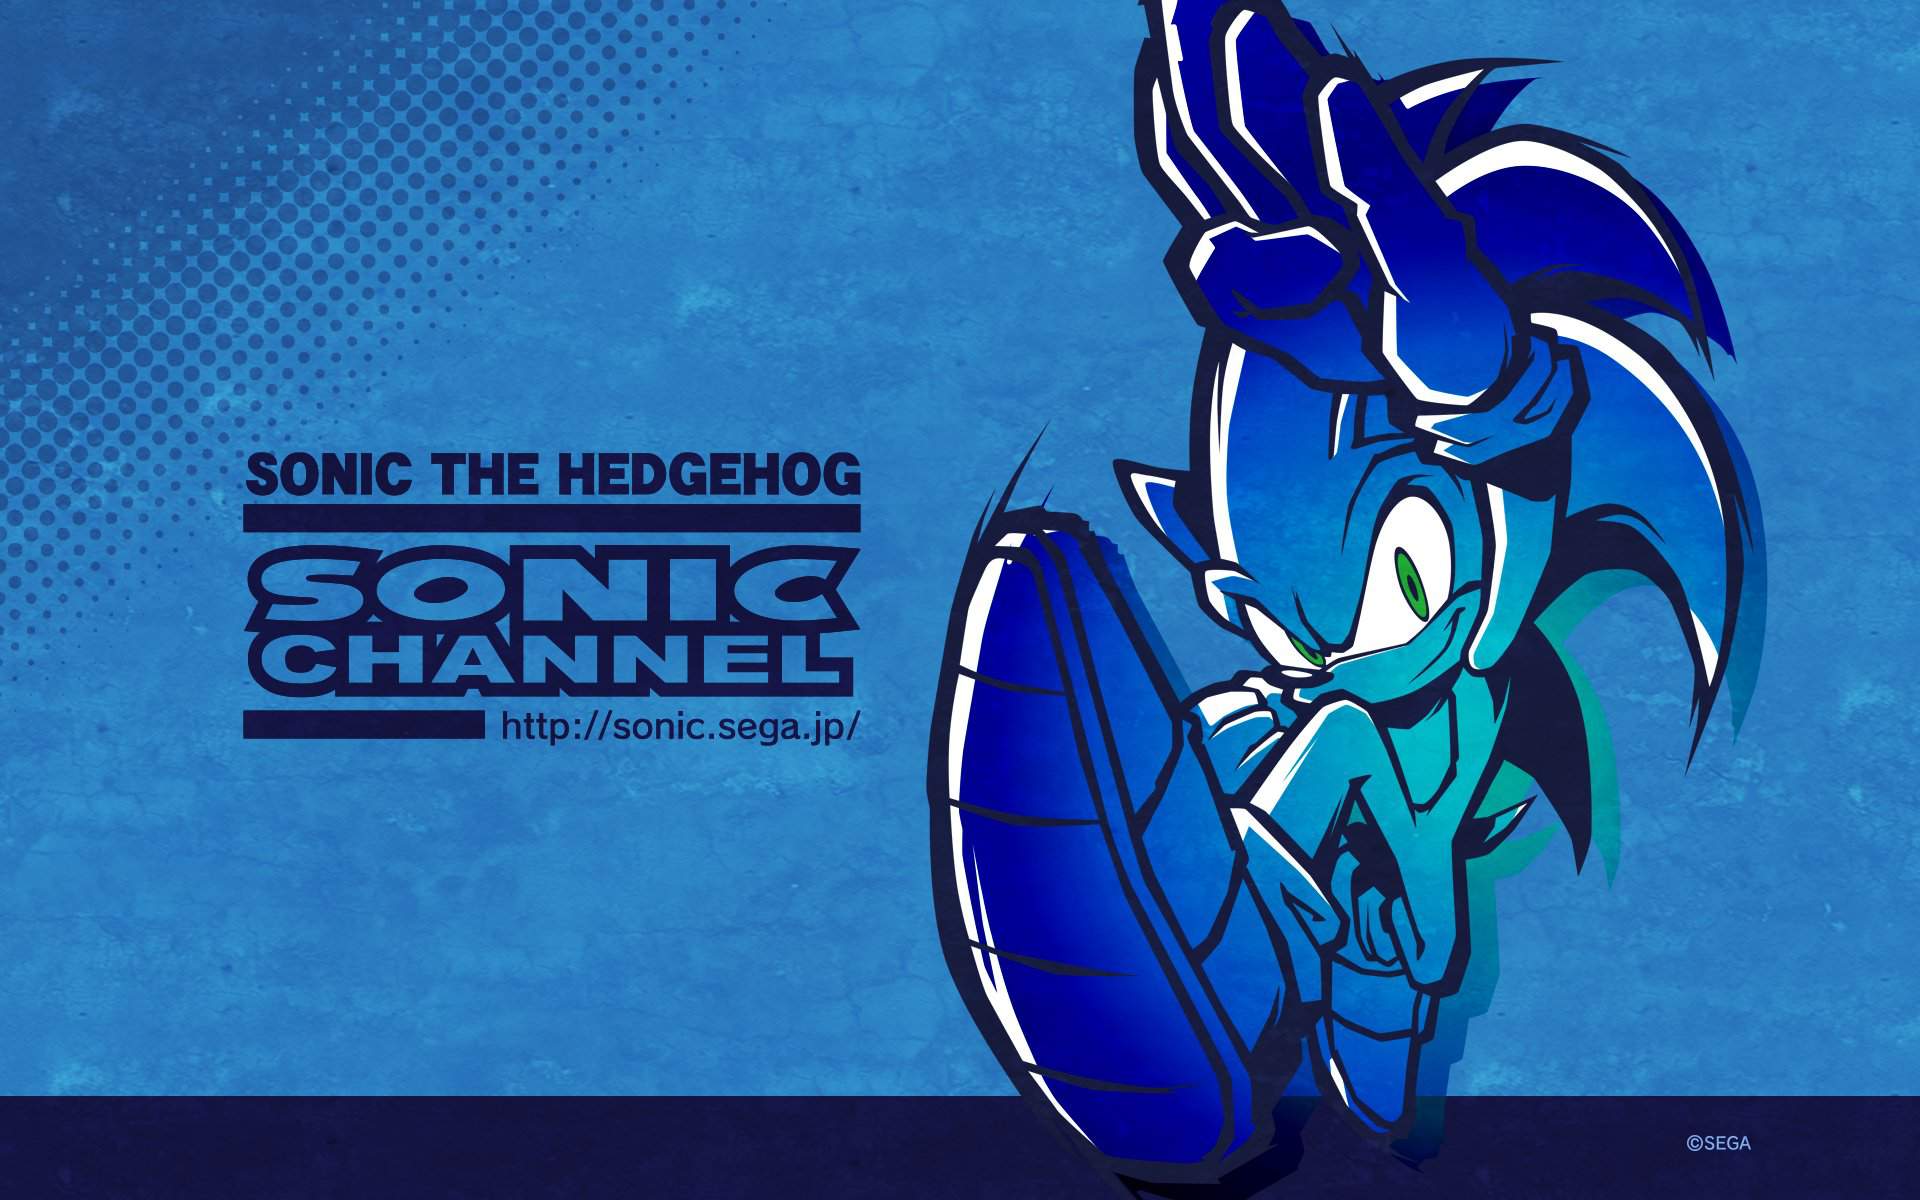 New Sonic Channel Wallpaper. Sonic the Hedgehog! Amino